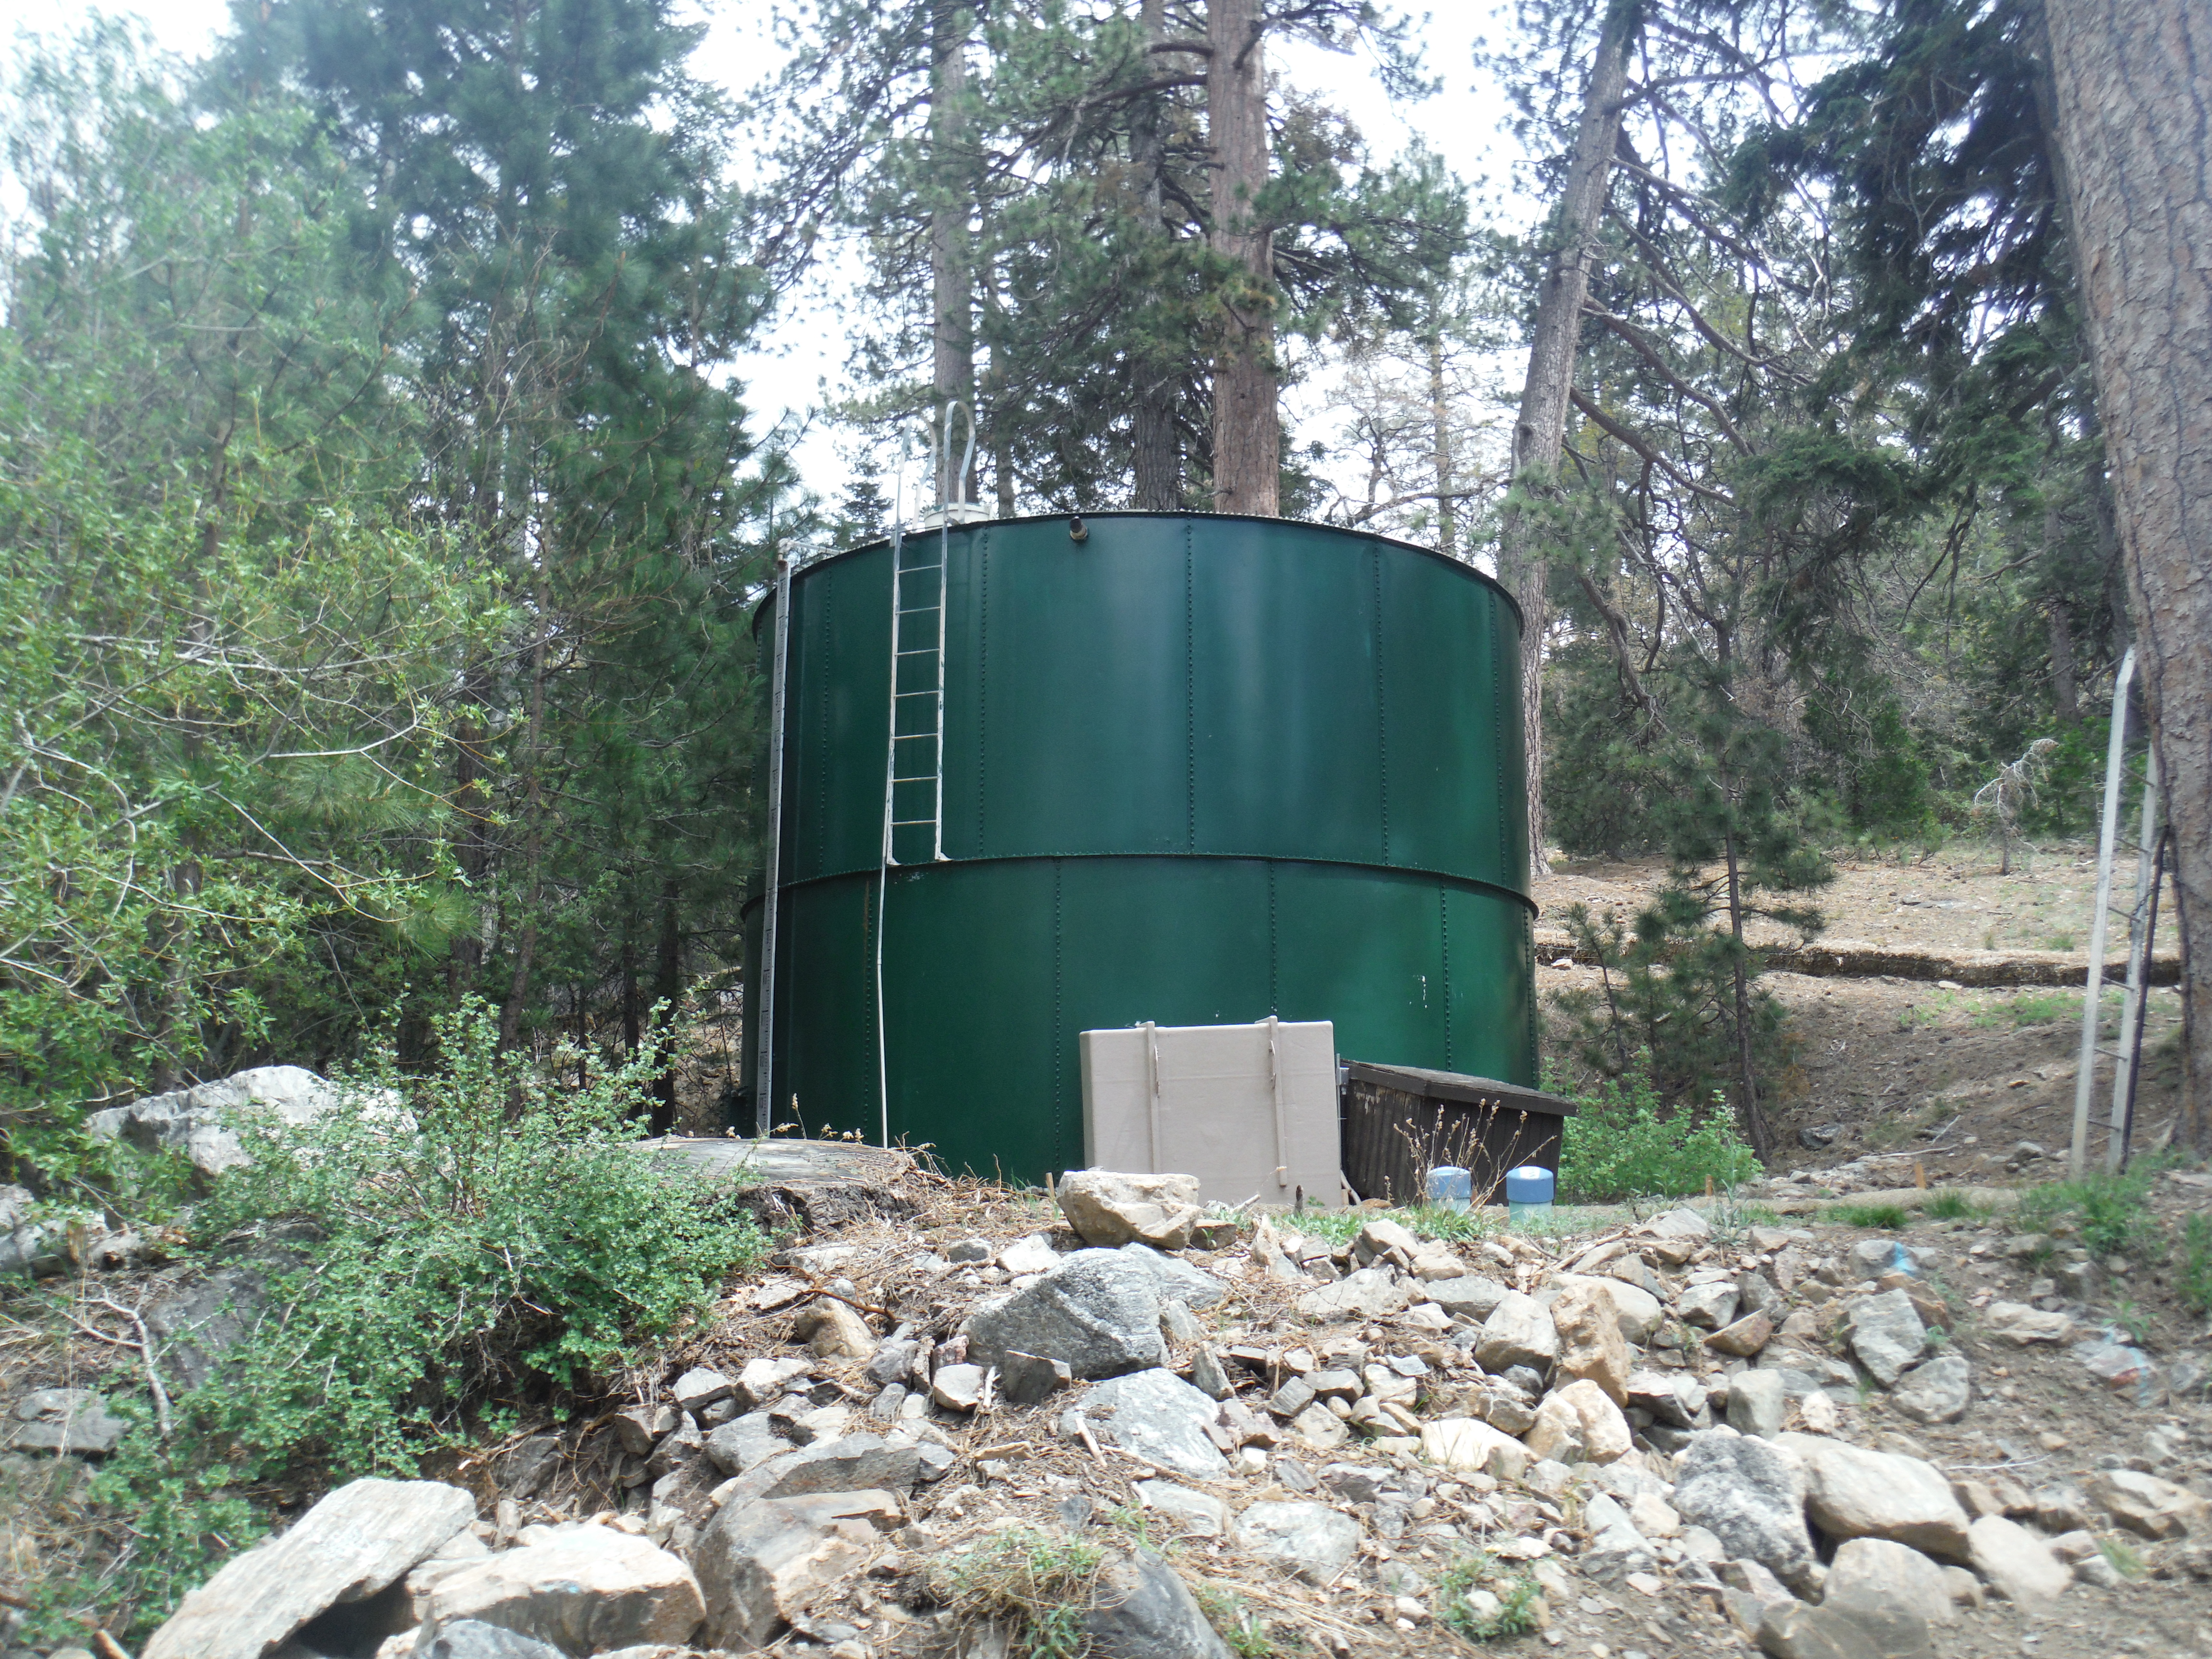 Our current water tank is 60 years old